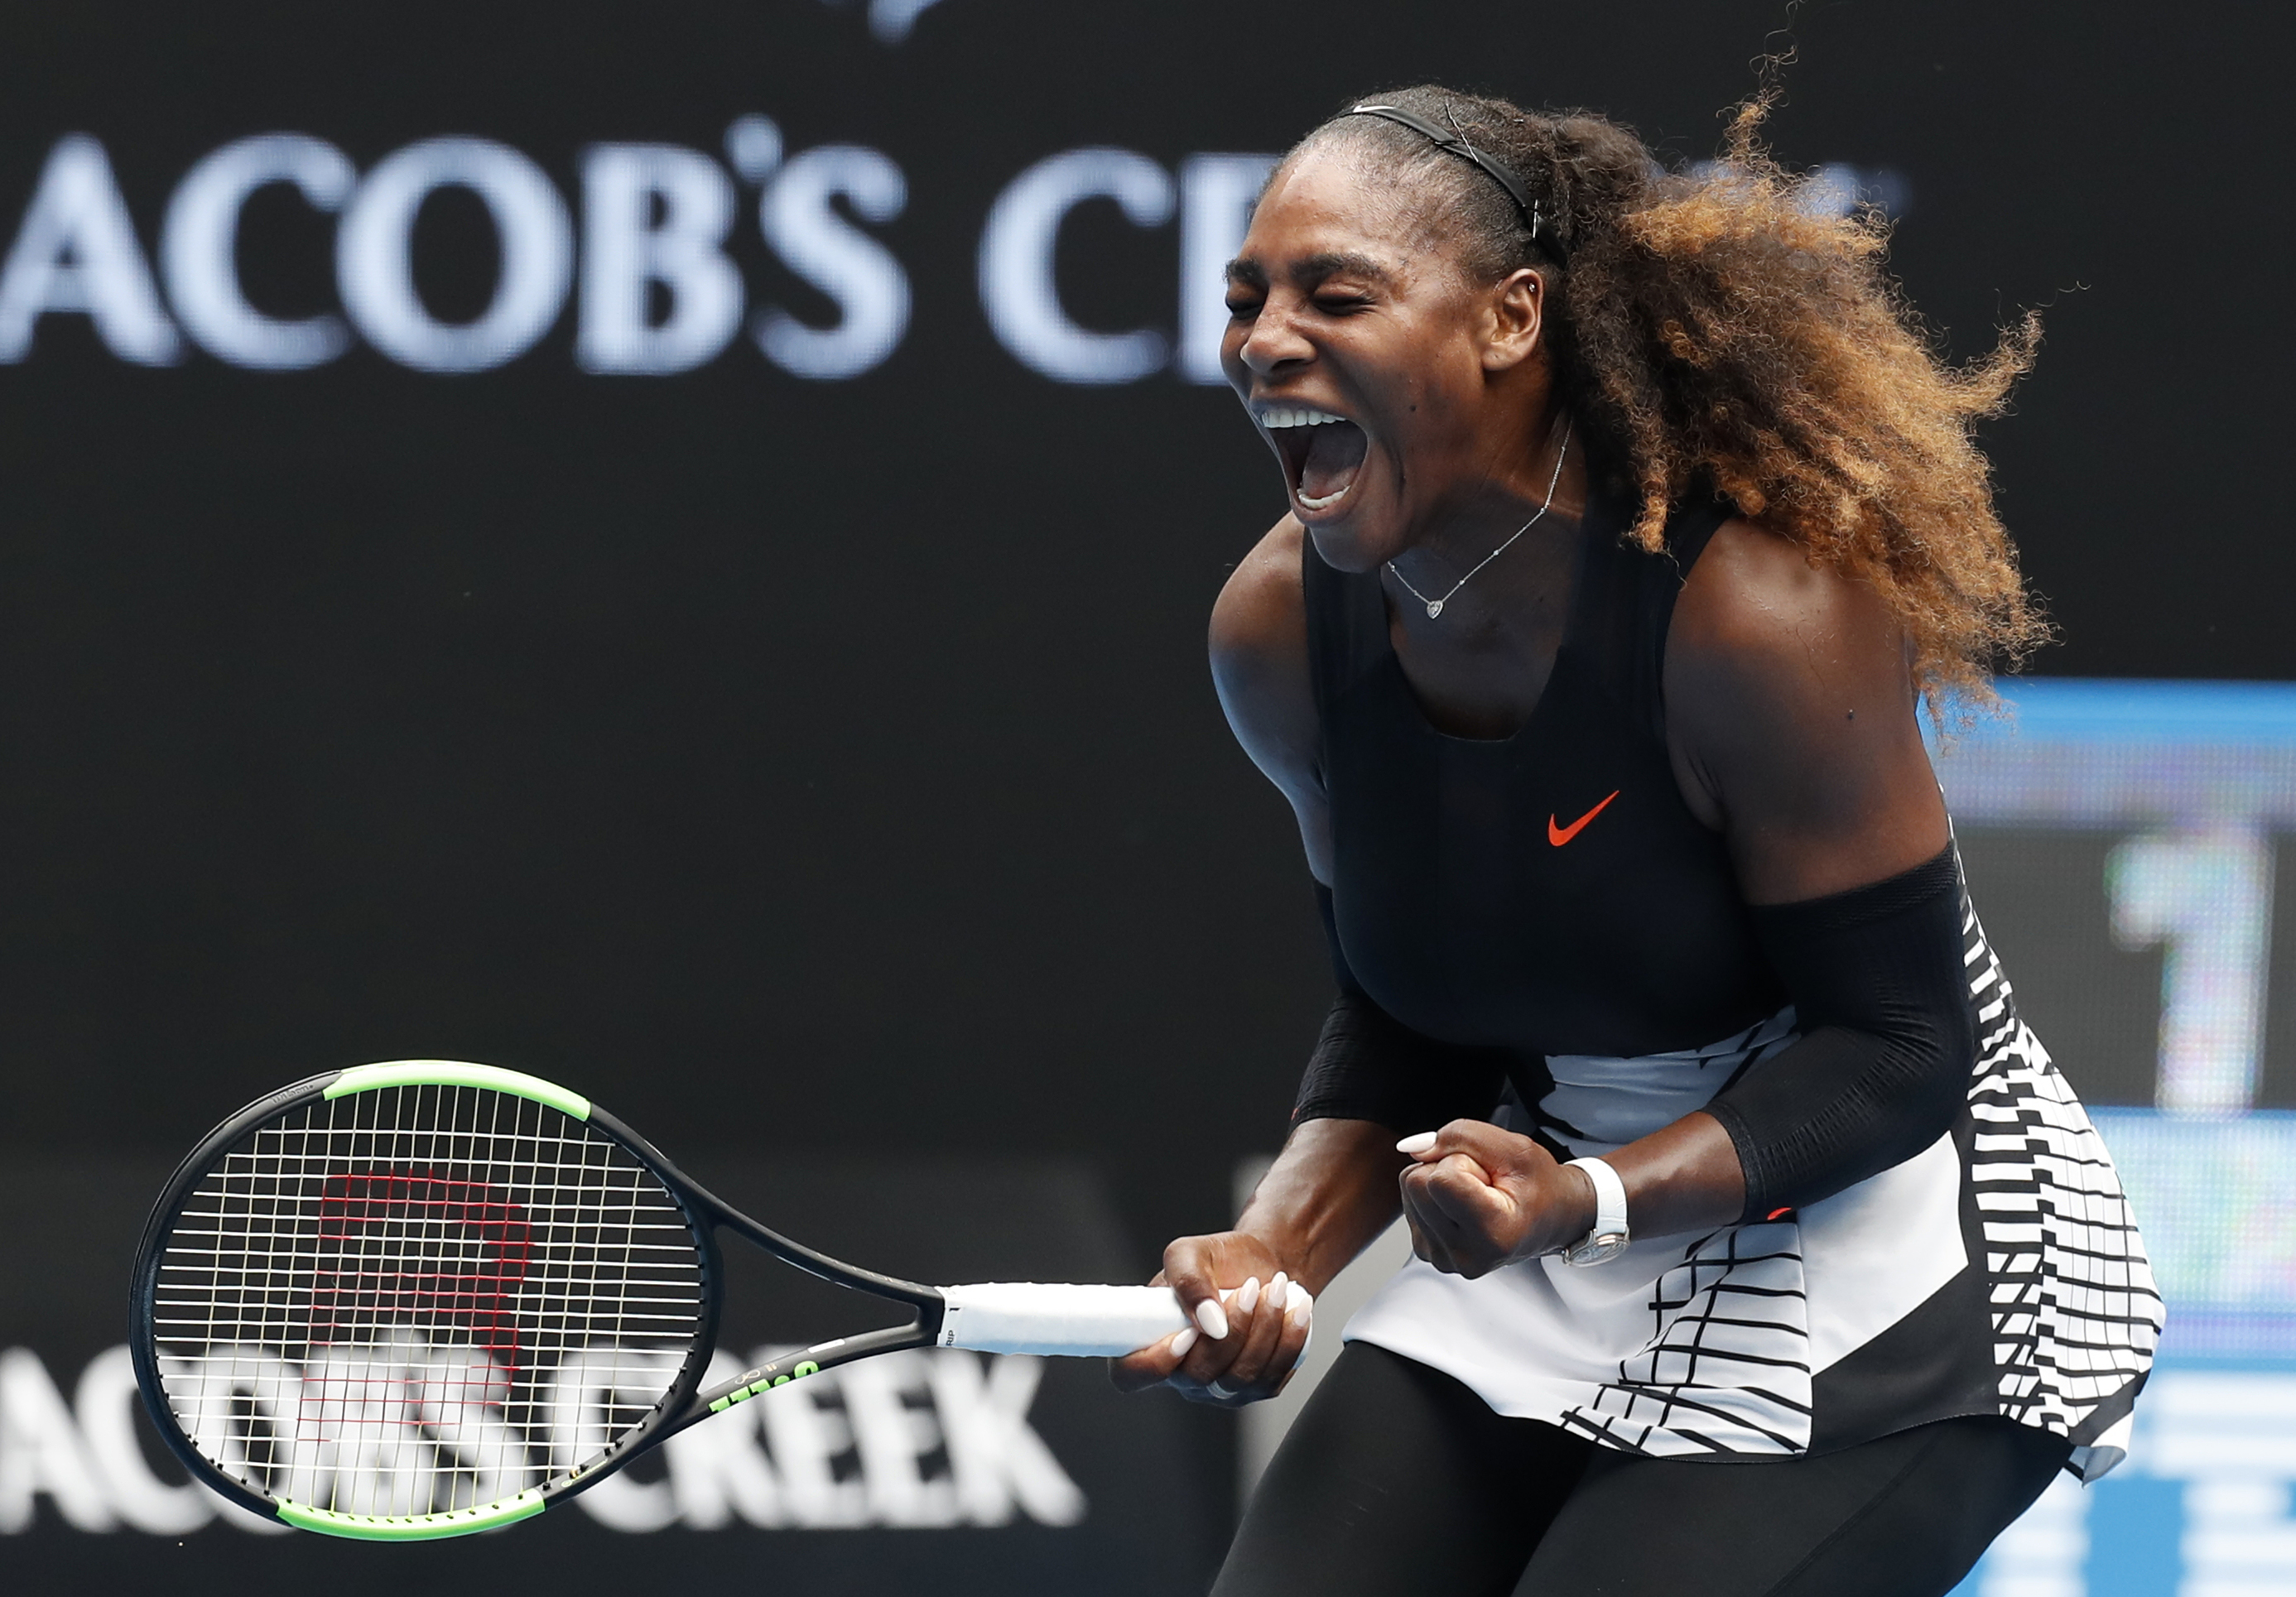 United States' Serena Williams celebrates after winning the first set against Barbora Strycova of the Czech Republic during their fourth round match at the Australian Open tennis championships in Melbourne, Australia, Monday, Jan. 23, 2017. (AP Photo/Kin Cheung)